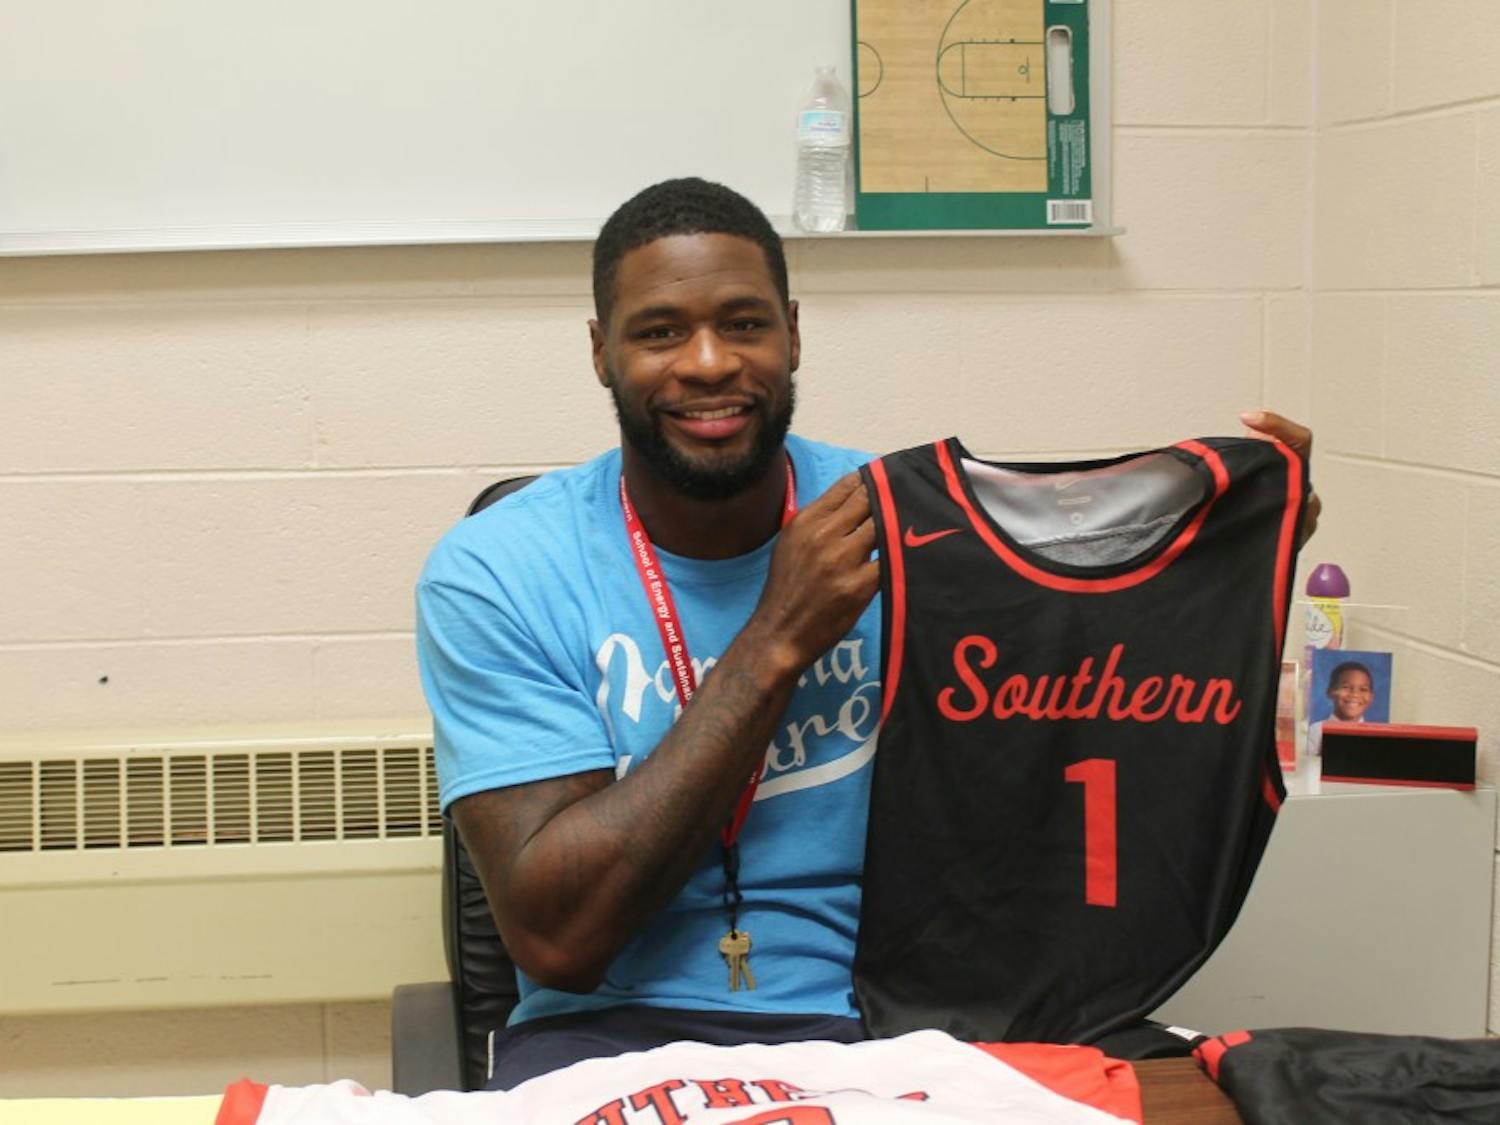 Southern Durham men's basketball head coach David Noel poses with a team jersey. Noel, who won a national championship with the UNC basketball team in 2005, returned to his former high school as a coach in late August.